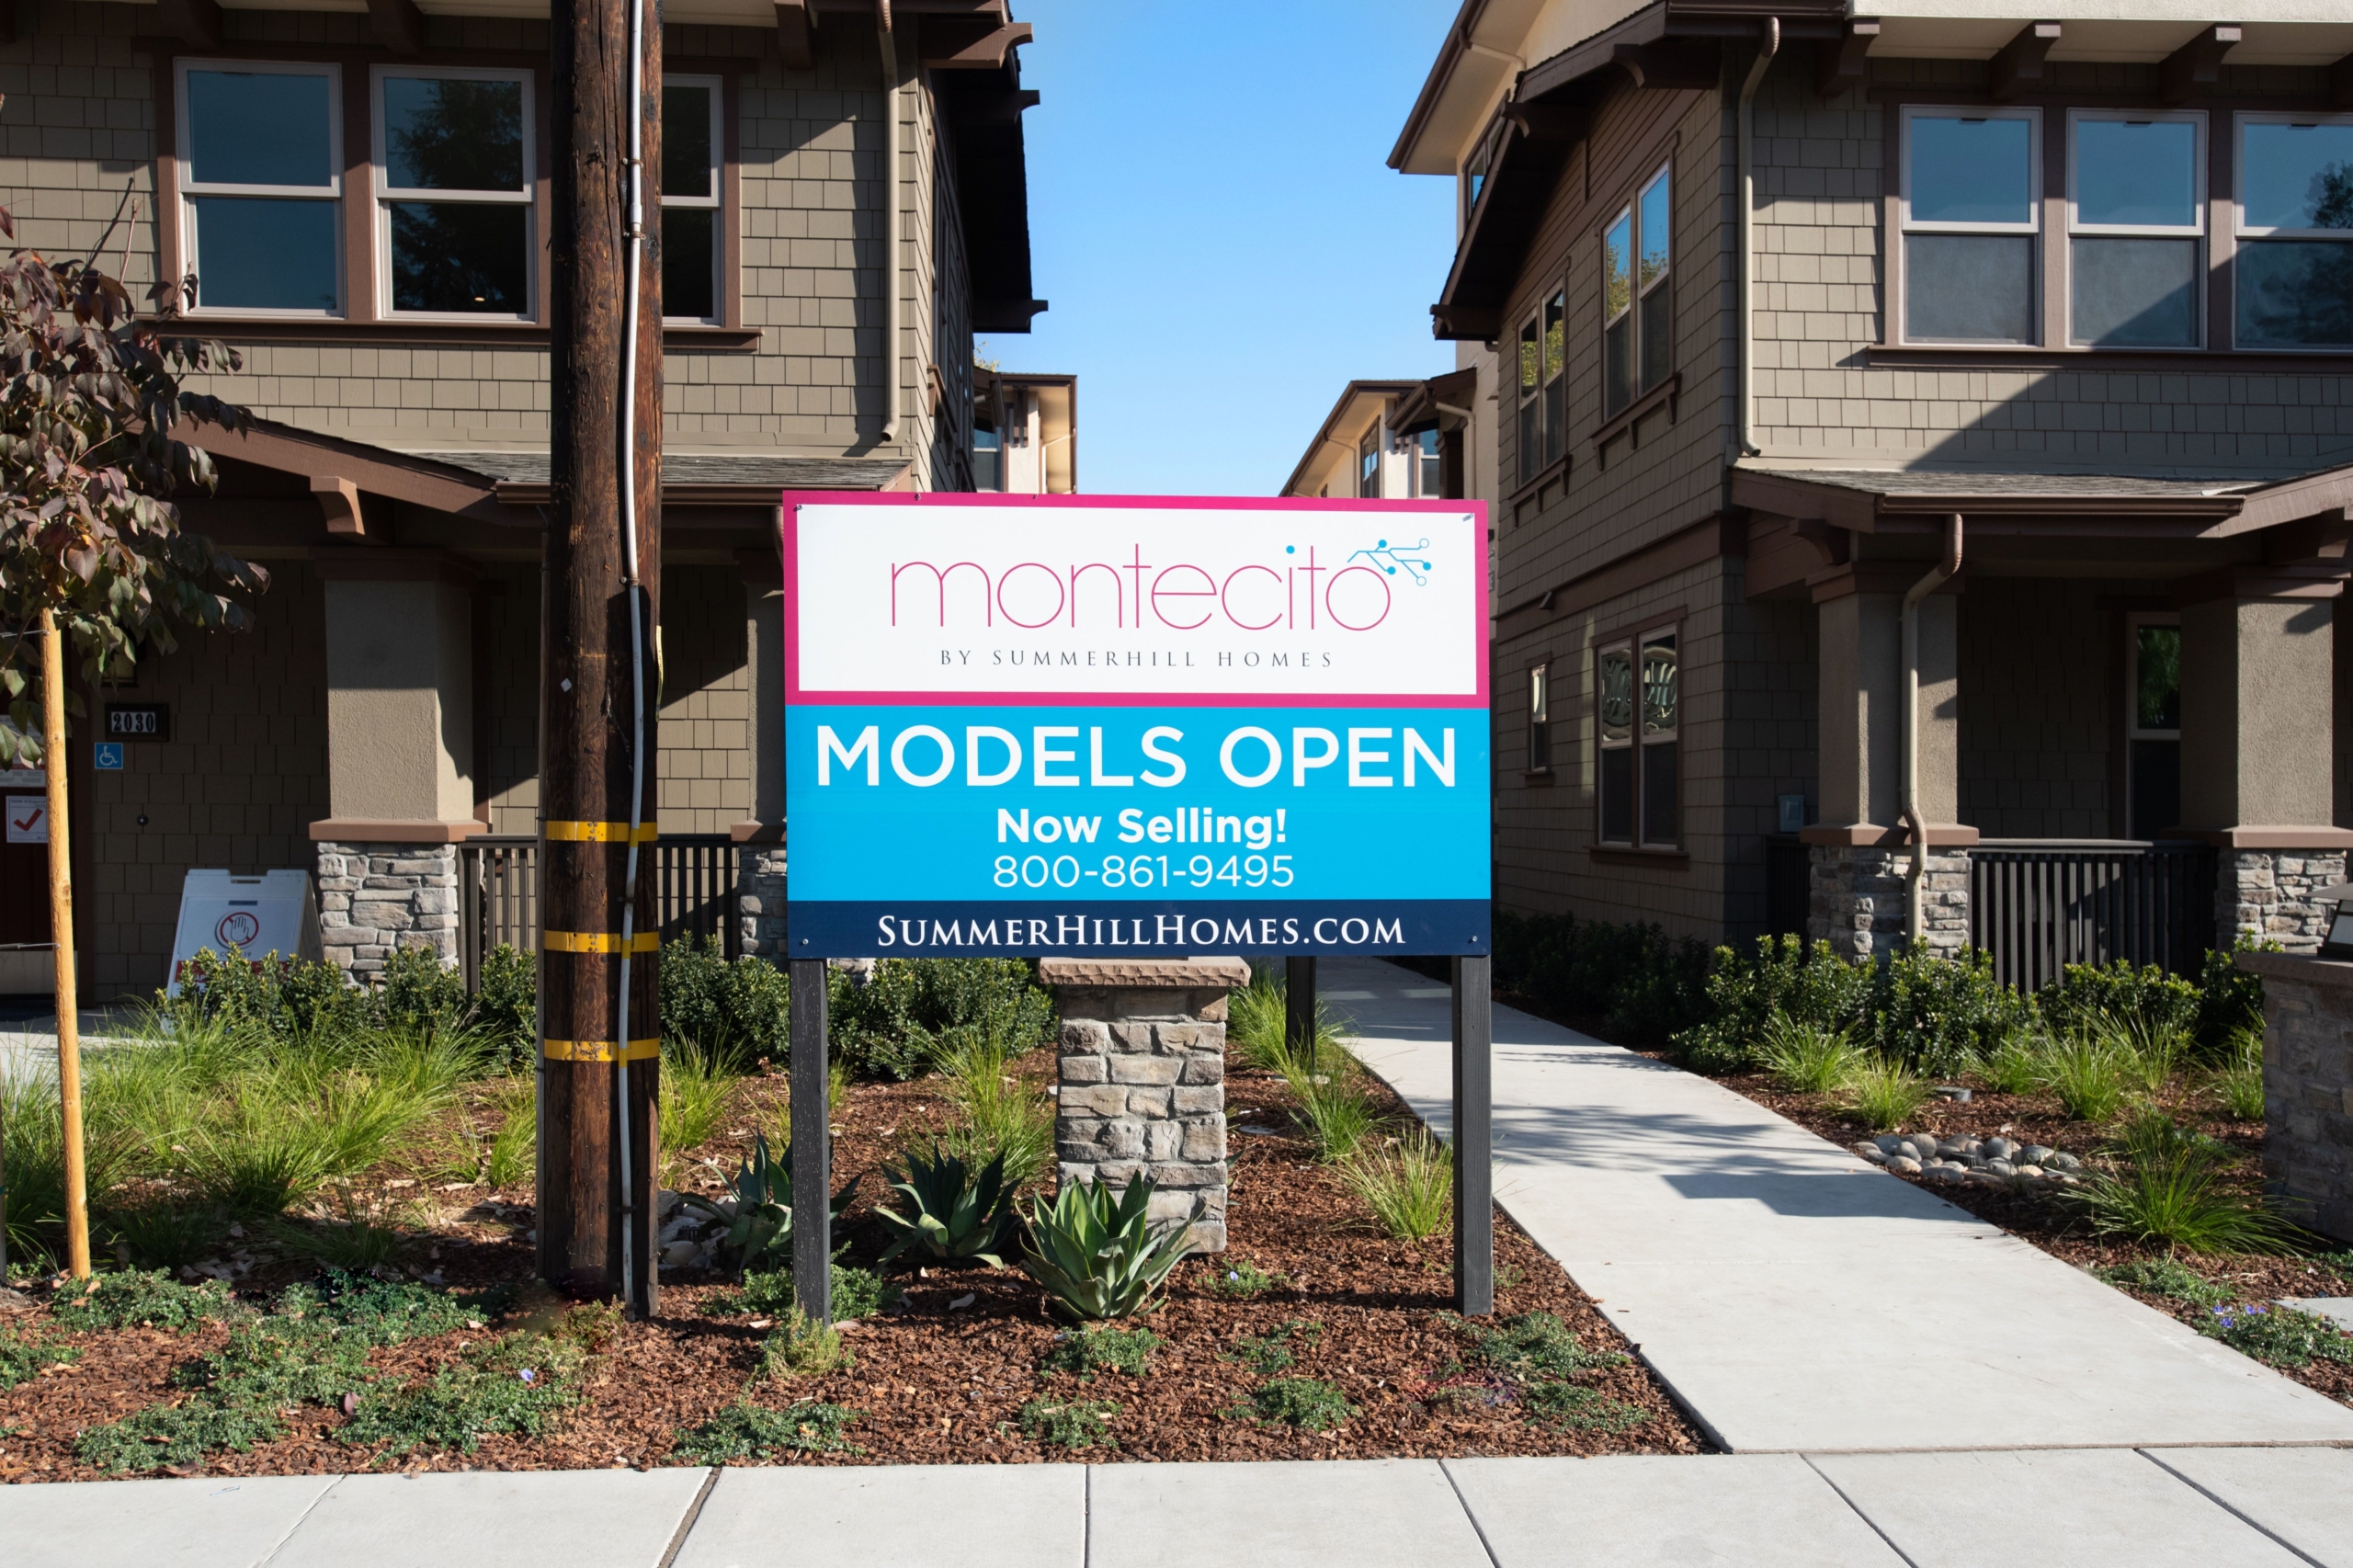 Montecito by Summerhill Homes Signage 9